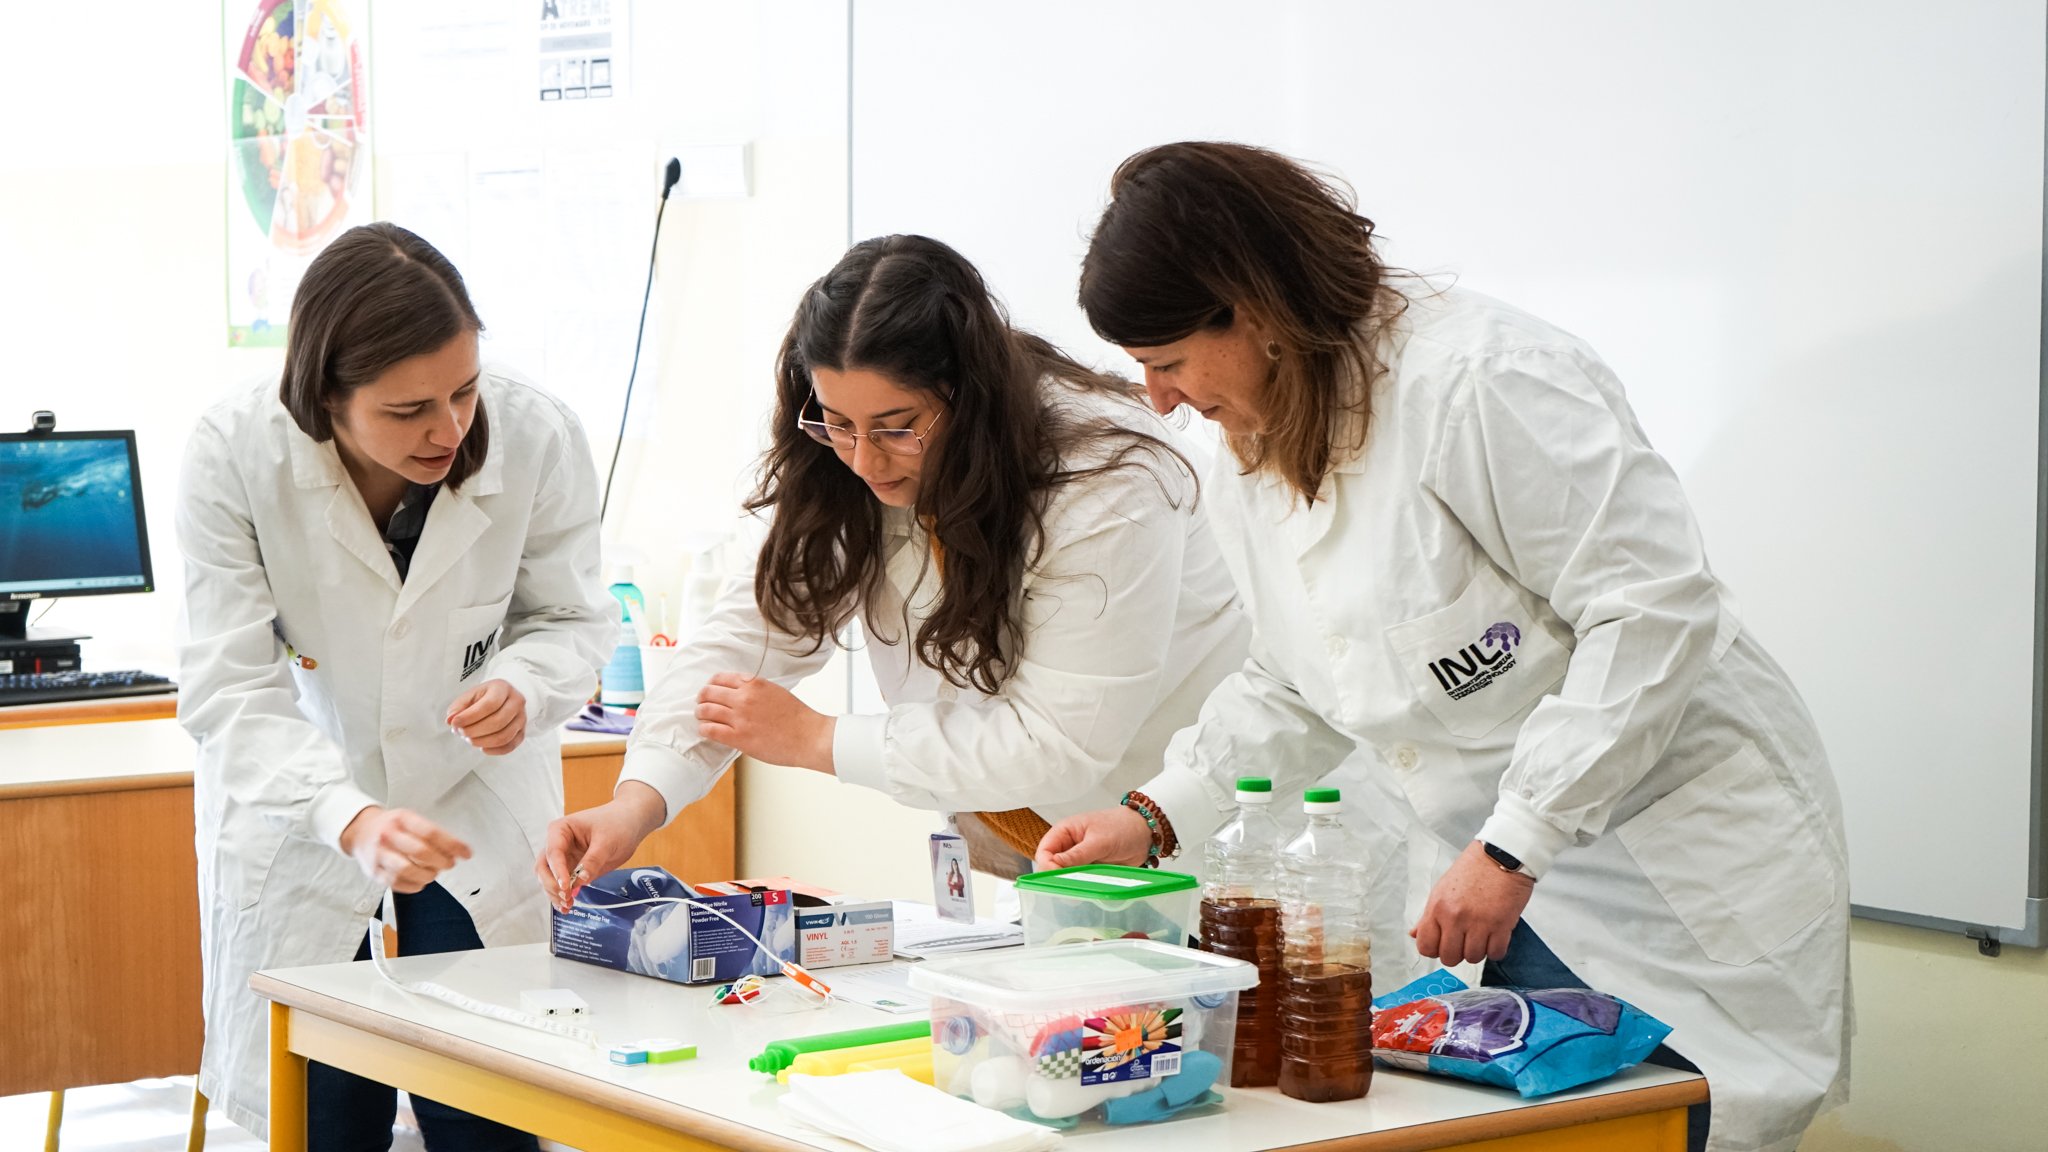 February 11, International Day of Women and Girls in Science